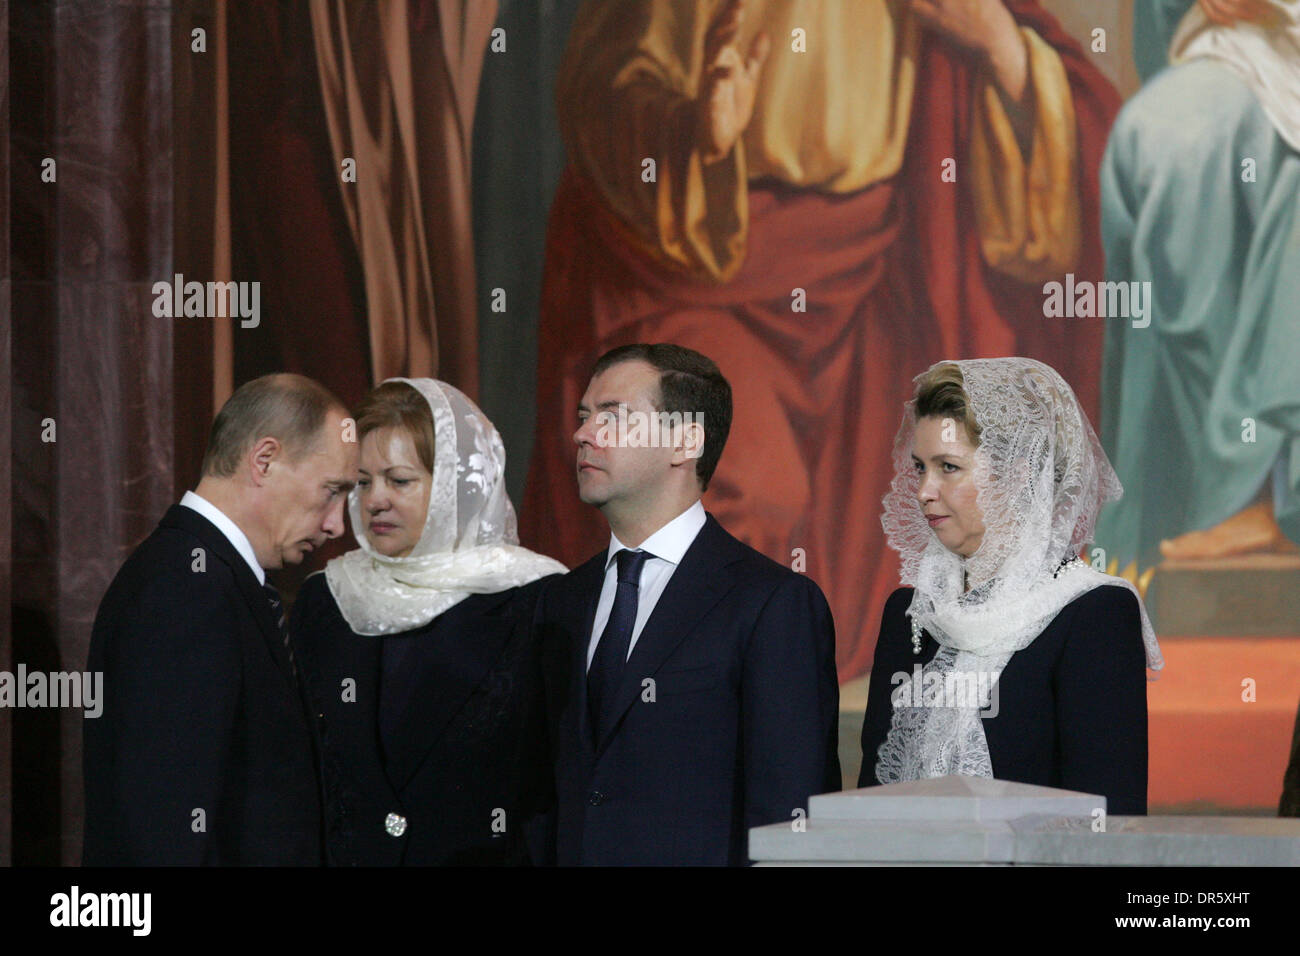 Feb 01, 2009 - Moscow, Russia - L-R Wife of Moldova President TAISIYA VORONINA, President DMITRY MEDVEDEV (C), his wife, SVETLANA MEDVEDEVA and Prime Minister VLADIMIR PUTIN (L) attend the enthronement ceremony of Patriarch Kirill of Moscow and All Russia, the 16th leader of the Russian Orthodox Church, at the Cathedral of Christ the Savior. (Credit Image: © PhotoXpress/ZUMA Press) Stock Photo